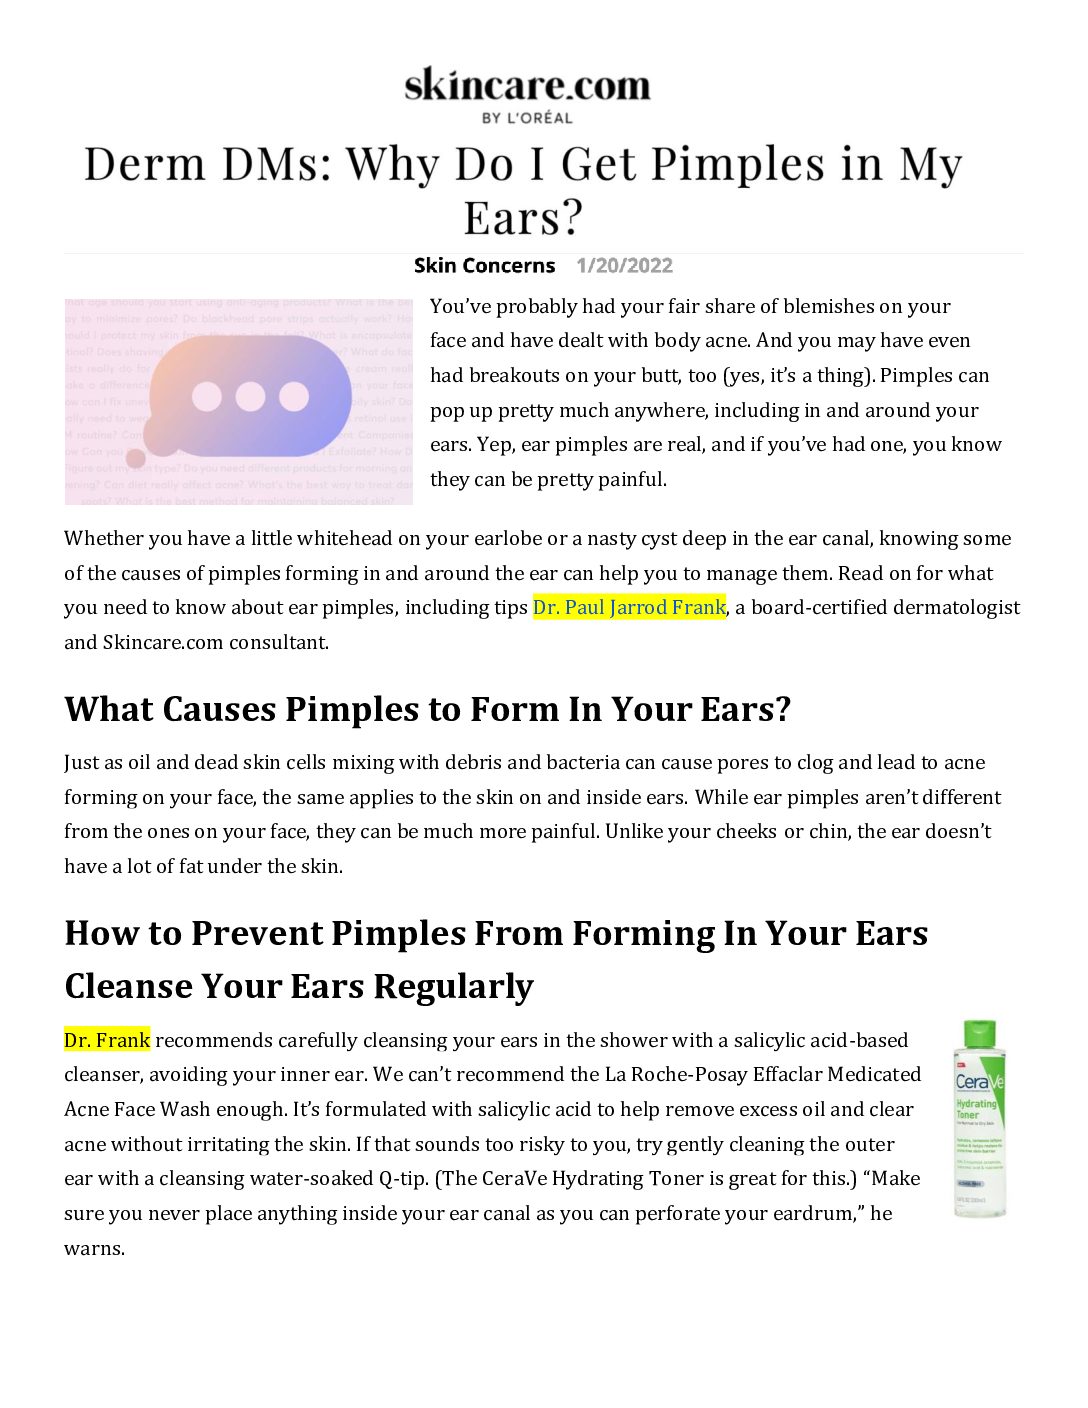 Dr. Paul Jarrod Frank featured in, “Derm DMs: Why Do I Get Pimples in My Ears?”